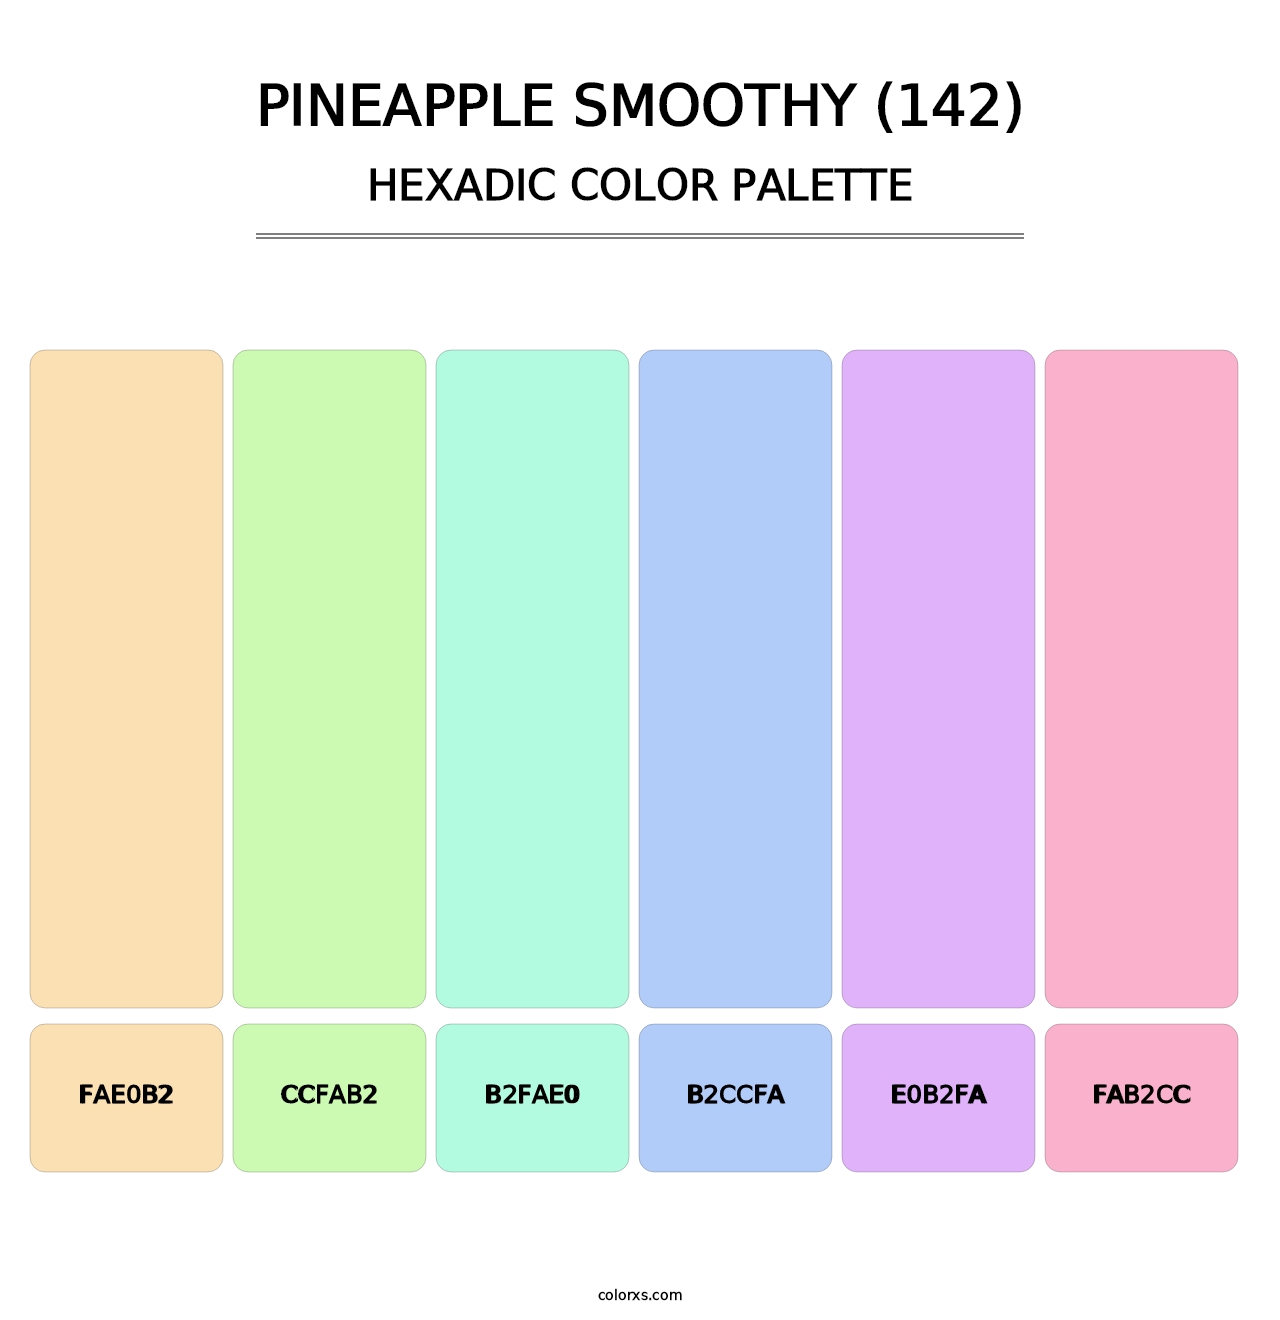 Pineapple Smoothy (142) - Hexadic Color Palette